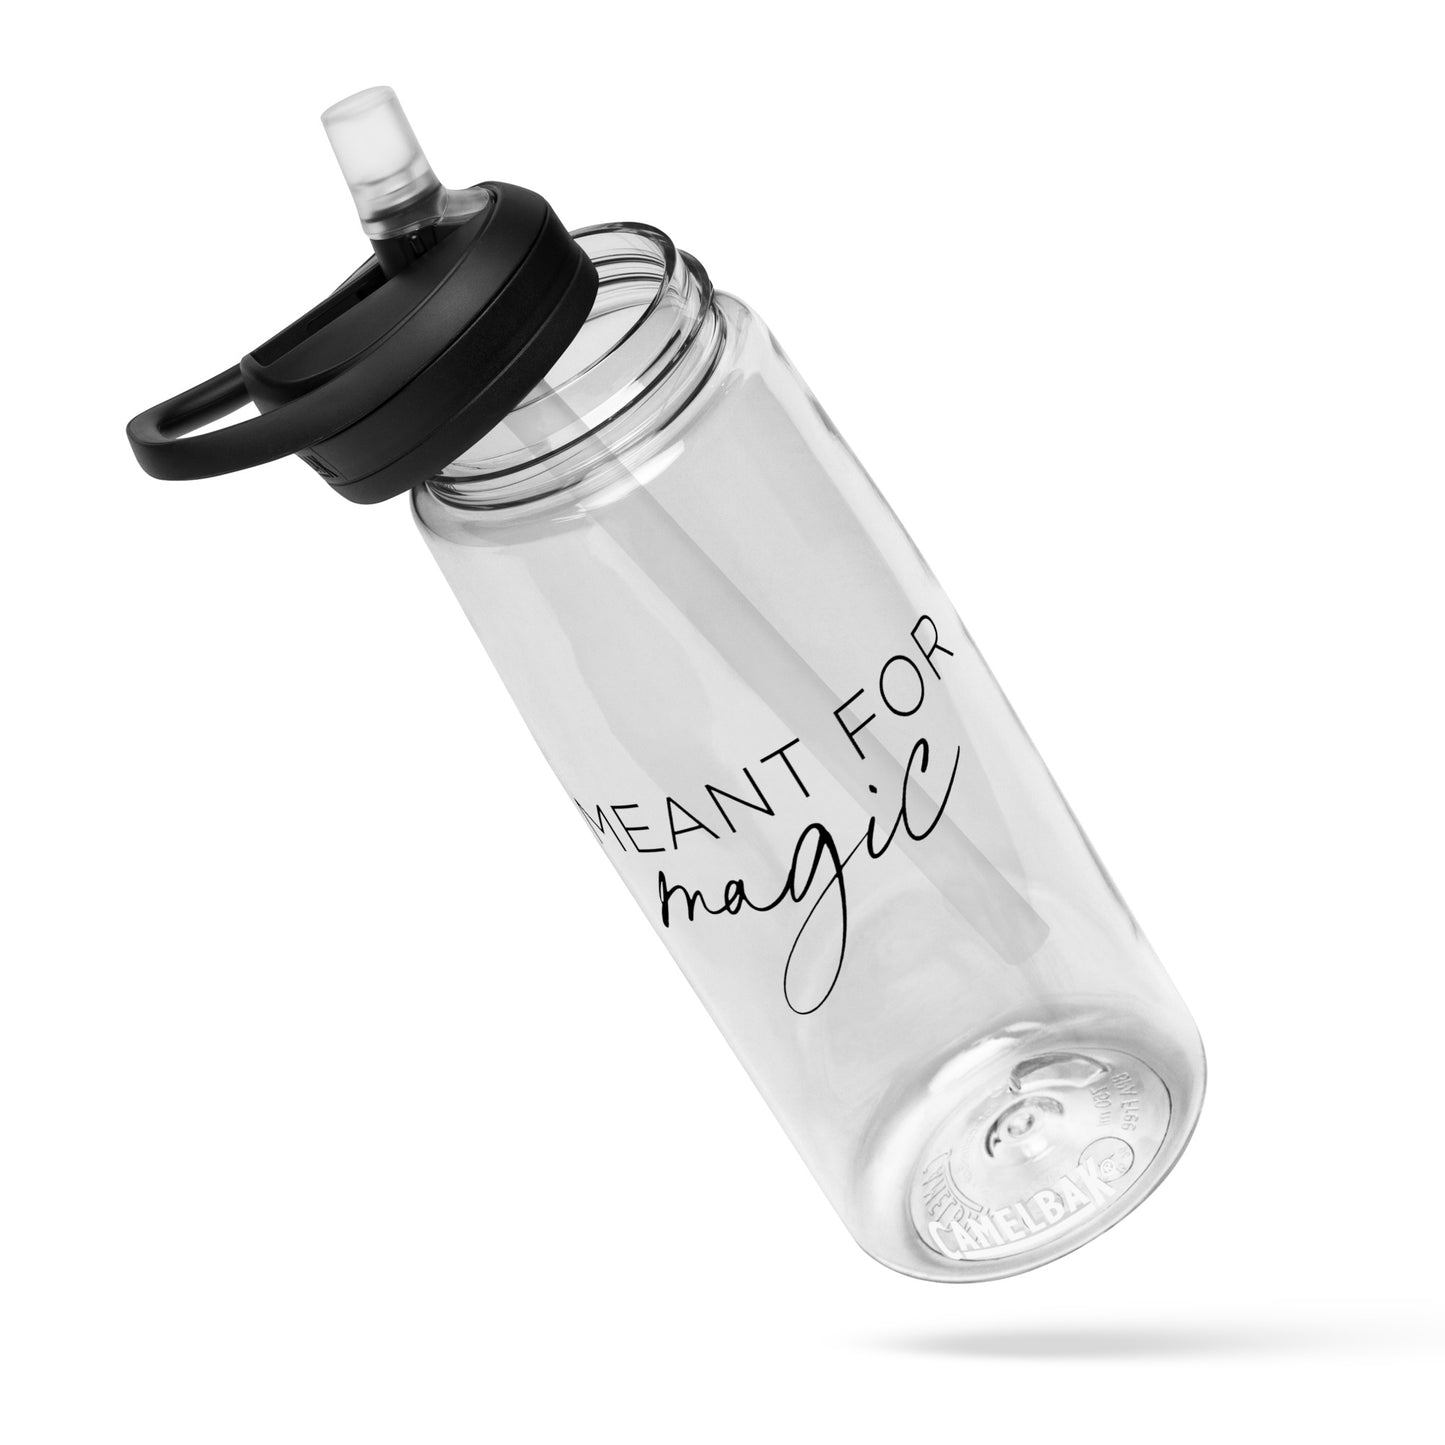 The Meant for Magic water bottle